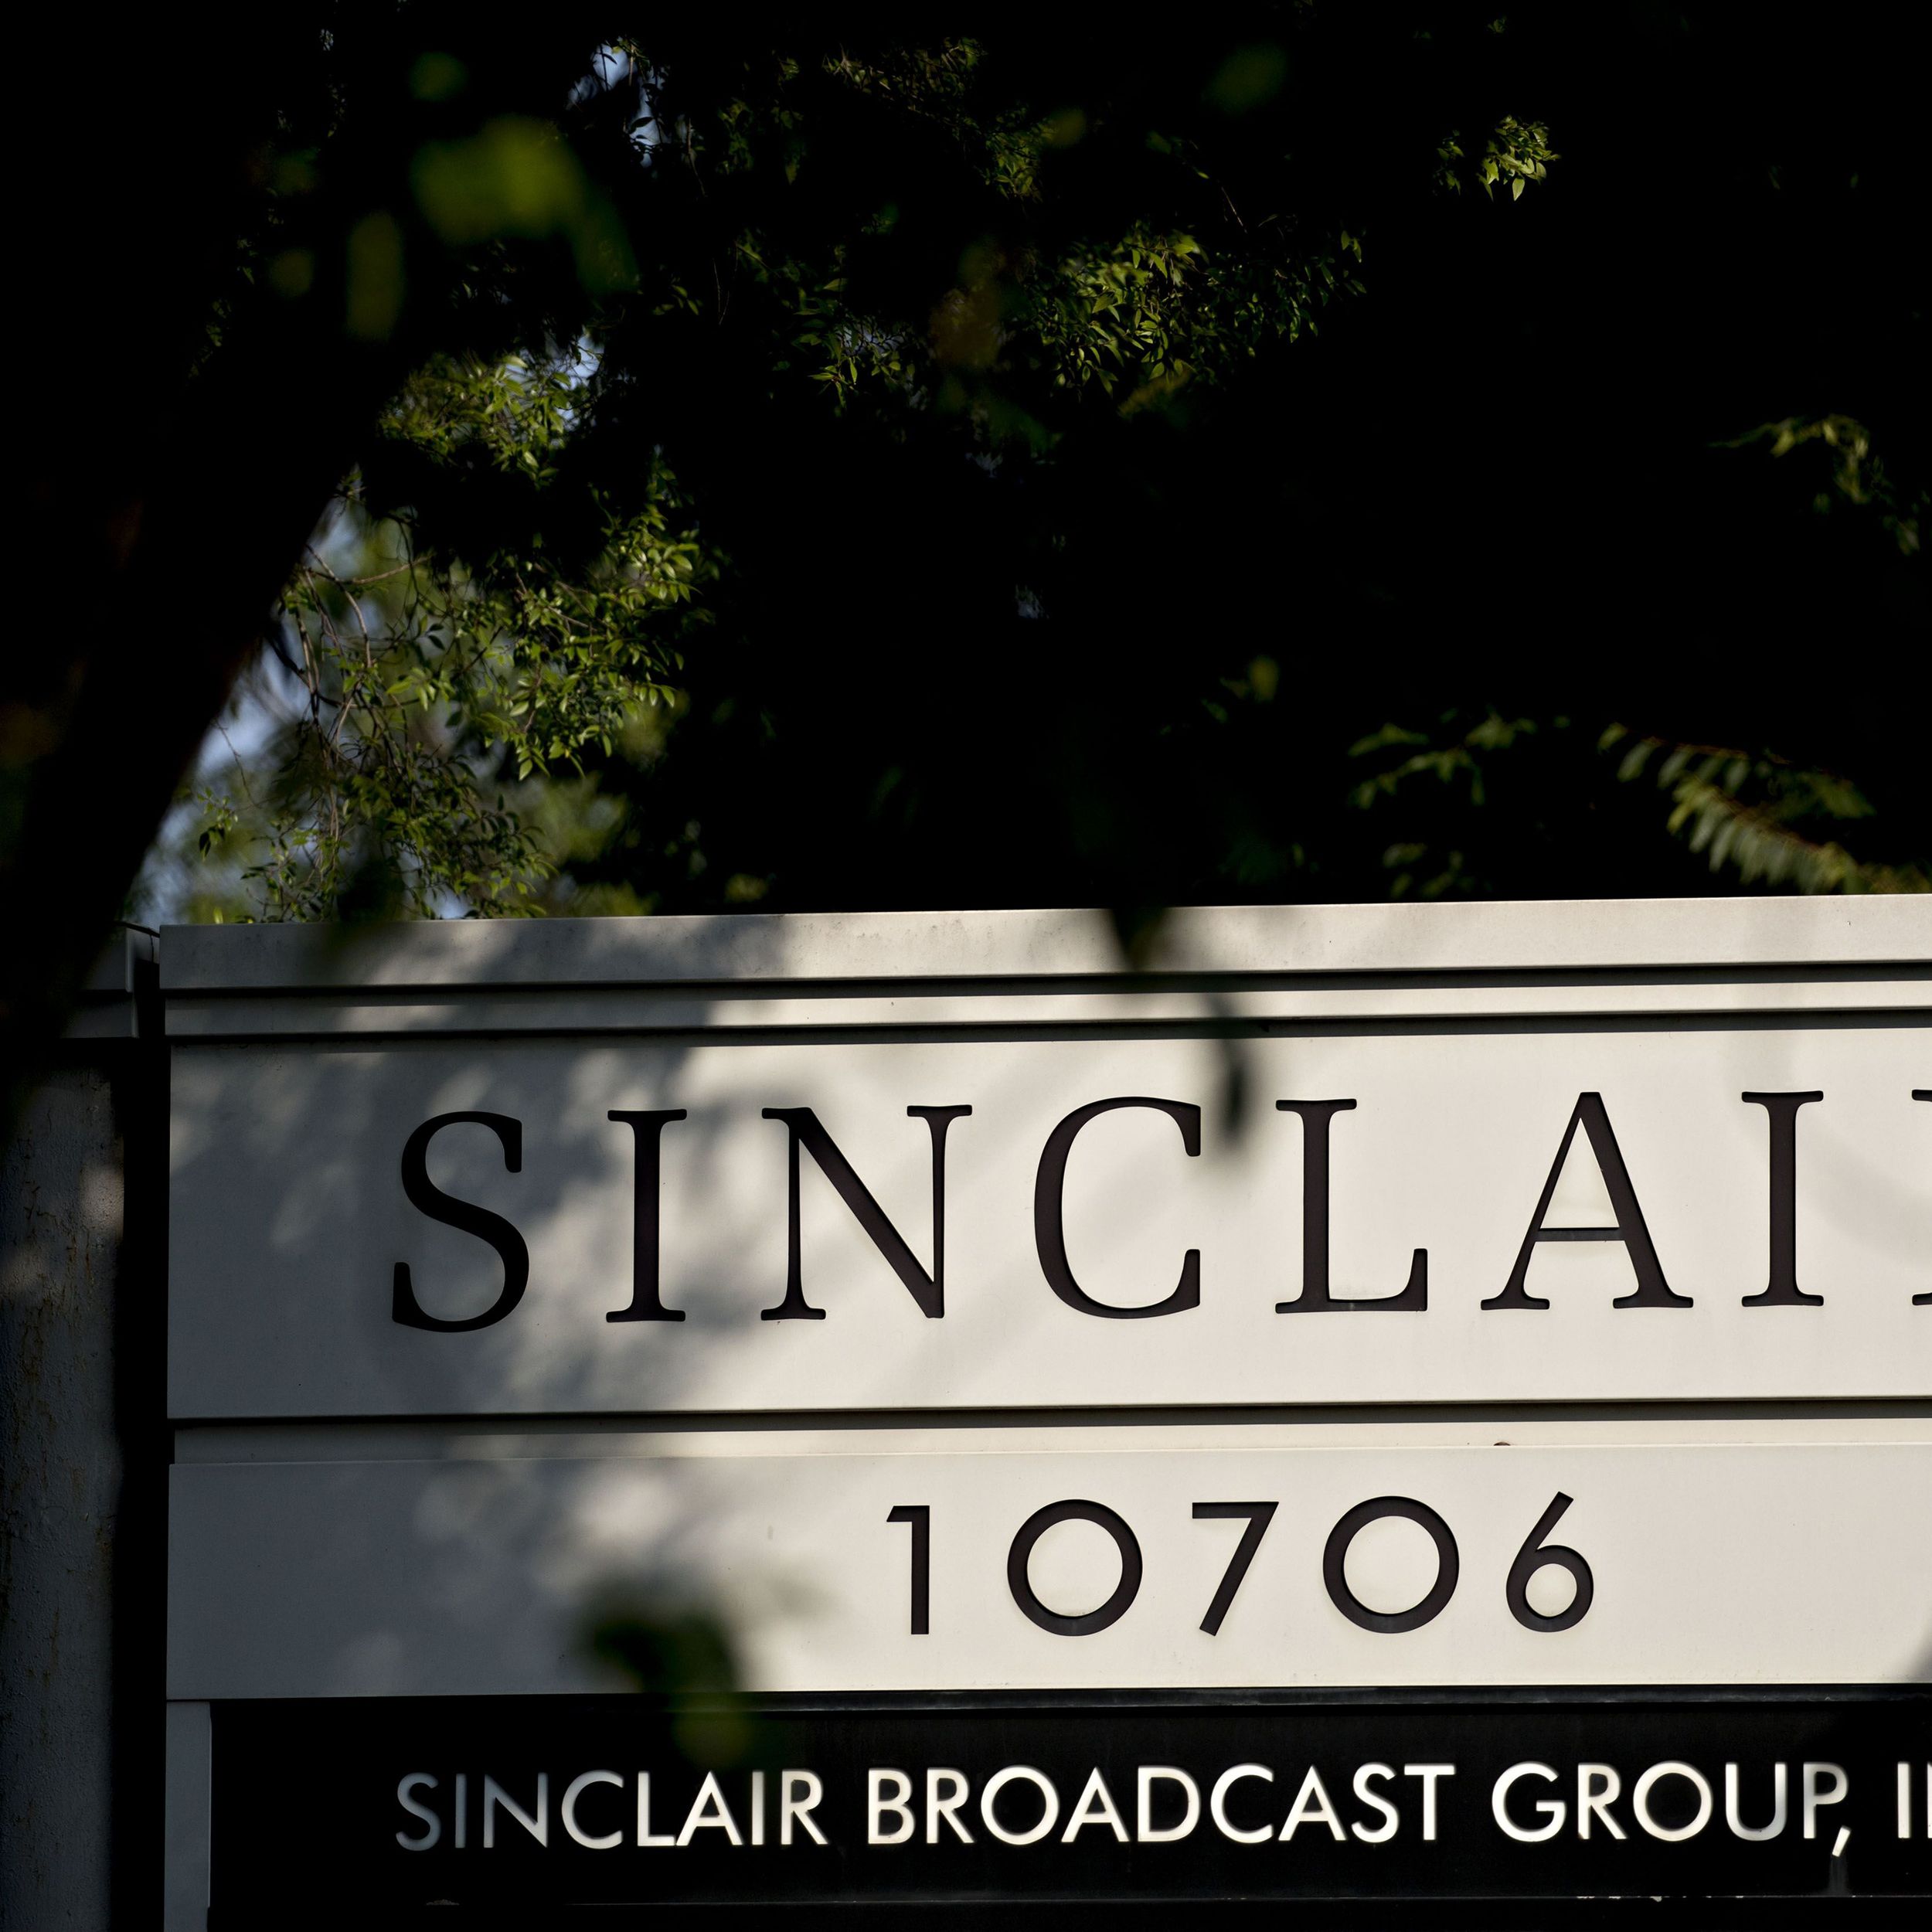 DSG files for bankruptcy, to be spun out from Sinclair - Sportcal